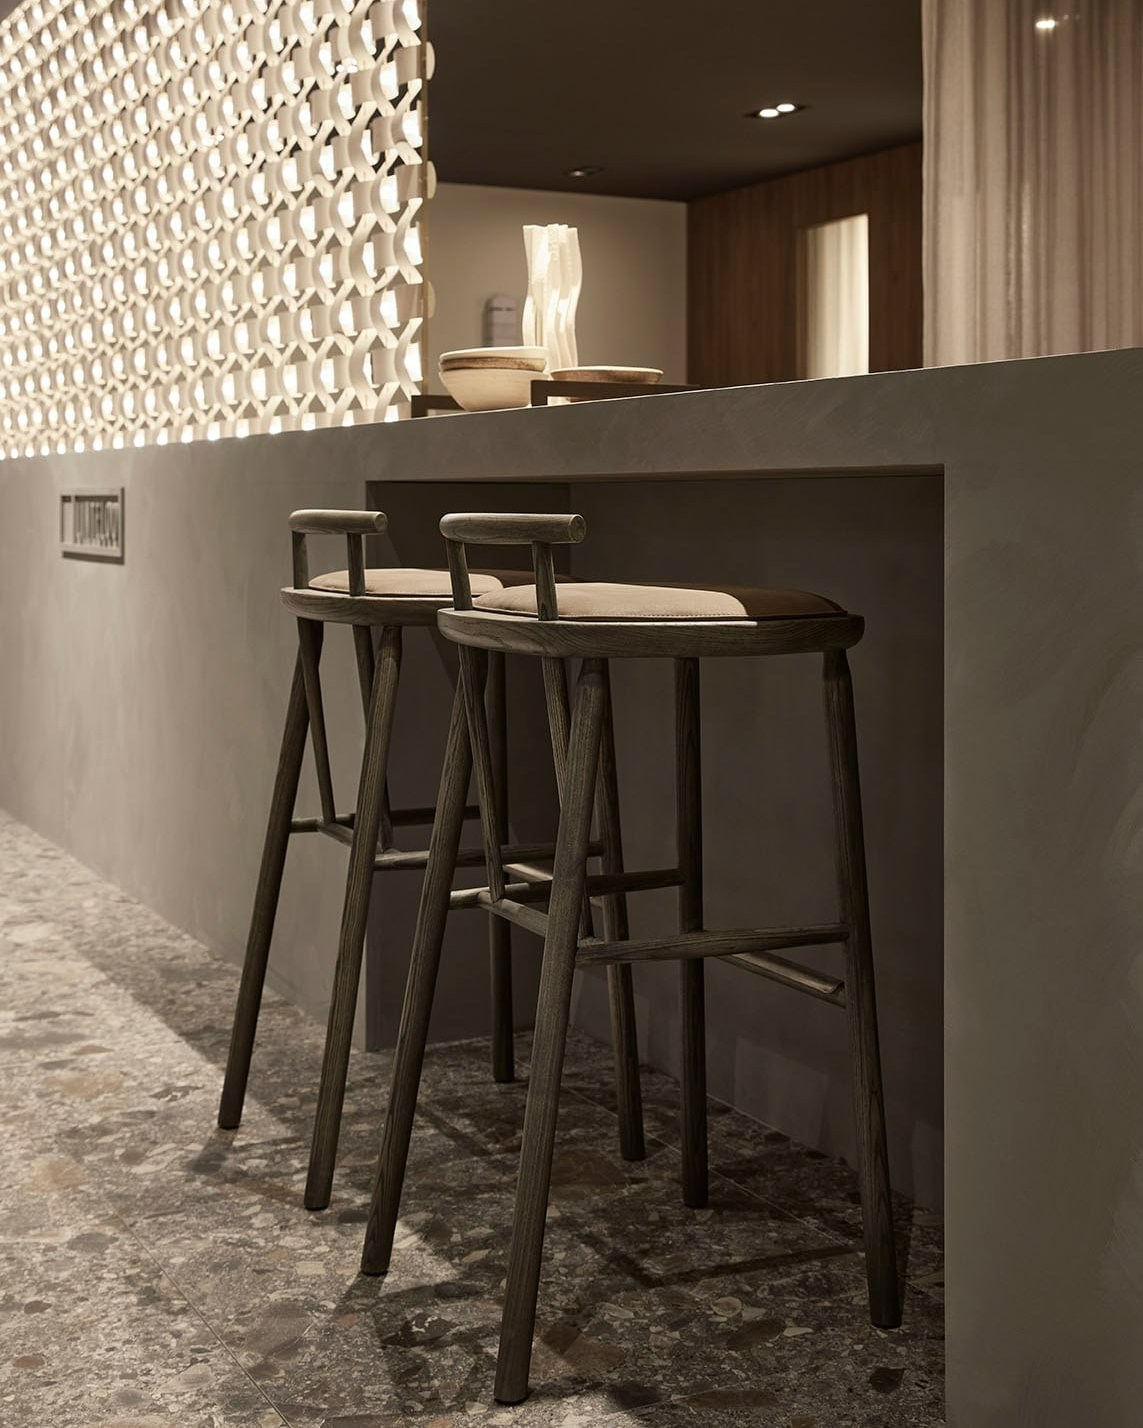 The new 'Oiseau' barstool: a minimalistic, yet utterly stylish bar stool. Delicate, airy, timeless, made of solid ash and set to become another Yabu Pushelberg classic. 

Same as its ‘Oiseau’ brothers and sisters—a dining table, chair and bench—, this barstool is available in a two heights, that allow for a highly individual take of living and dining (or drinking, for that matter). 

#linteloo #oiseau 

Photography: @alexandervanbergephotography 
Styling: @bregjenix @circlestylingstudio 
Ceramics: @marjokedeheer @lisanne.lammers 
Lighting artwork: @rick_tegelaar